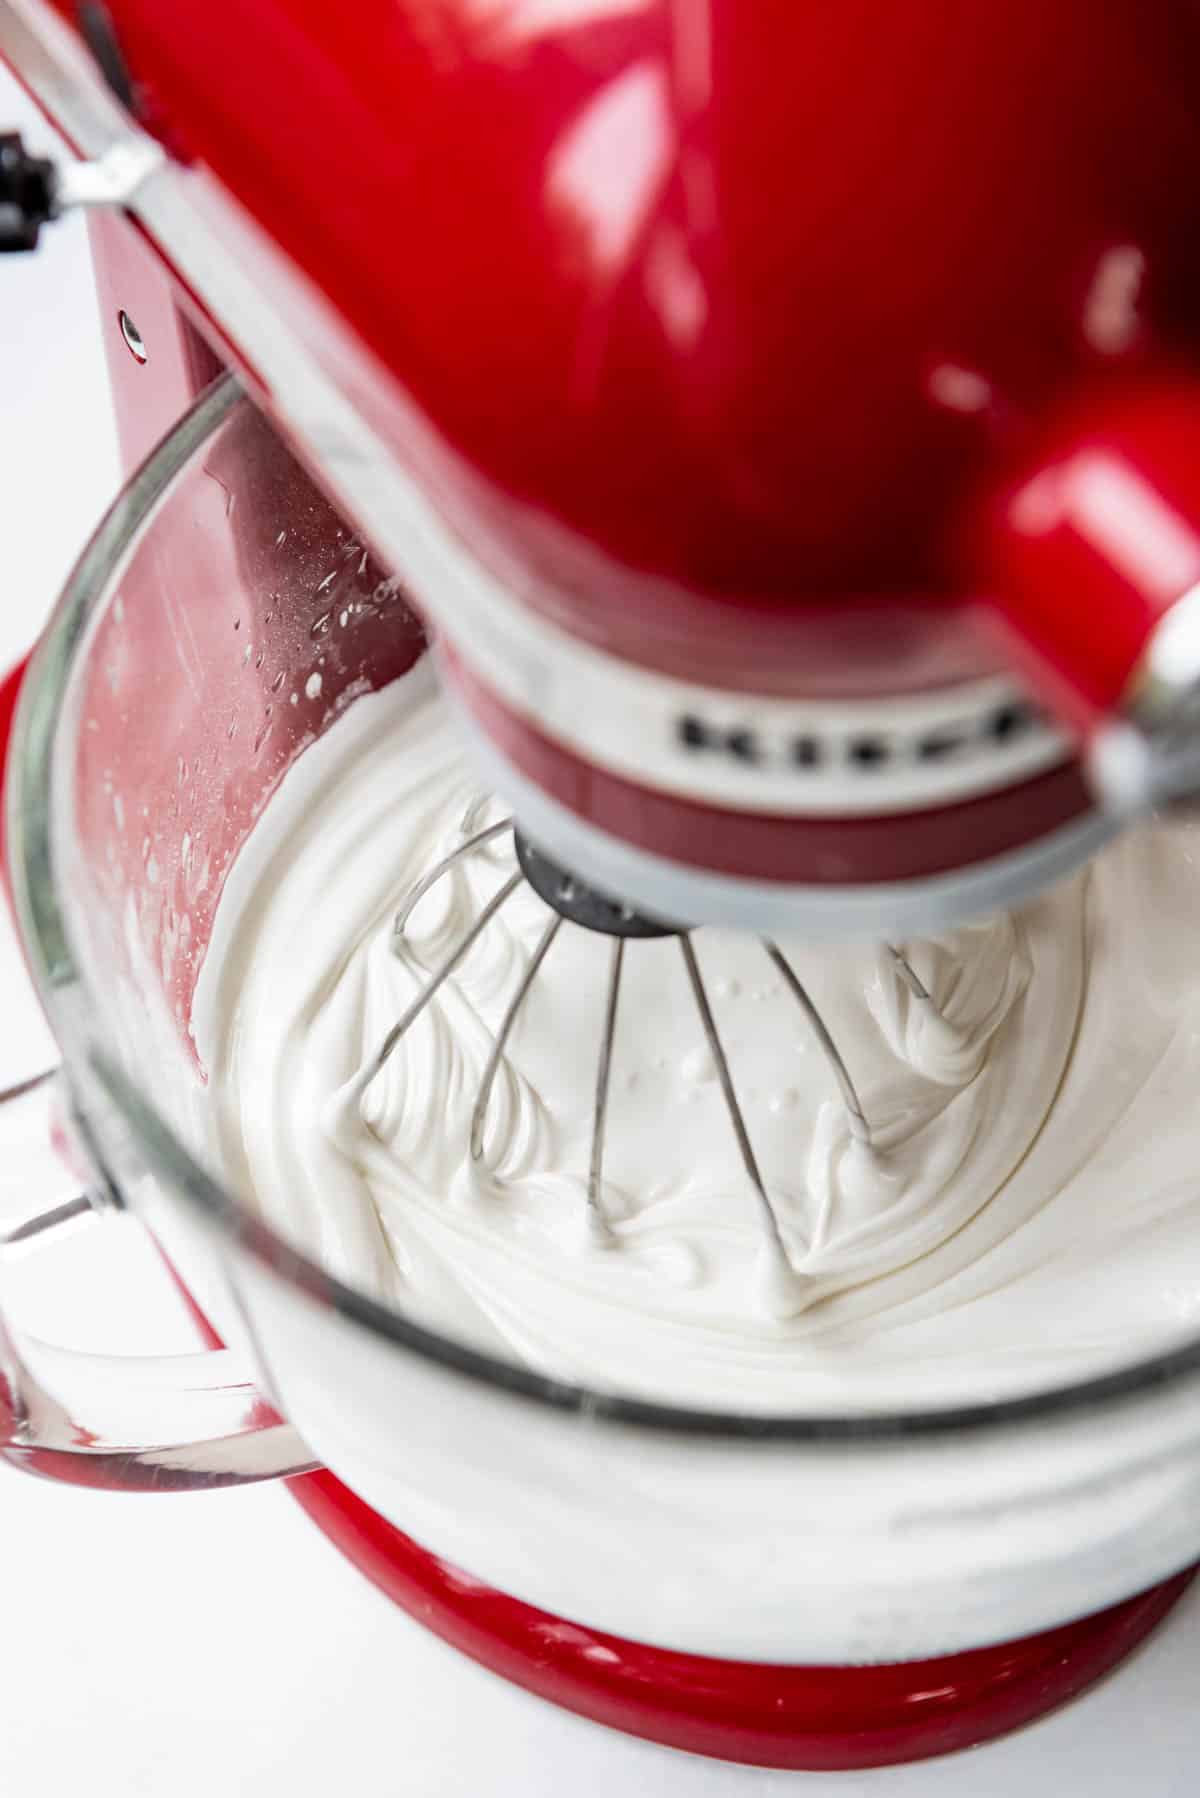 An image of white royal icing in a stand mixer.